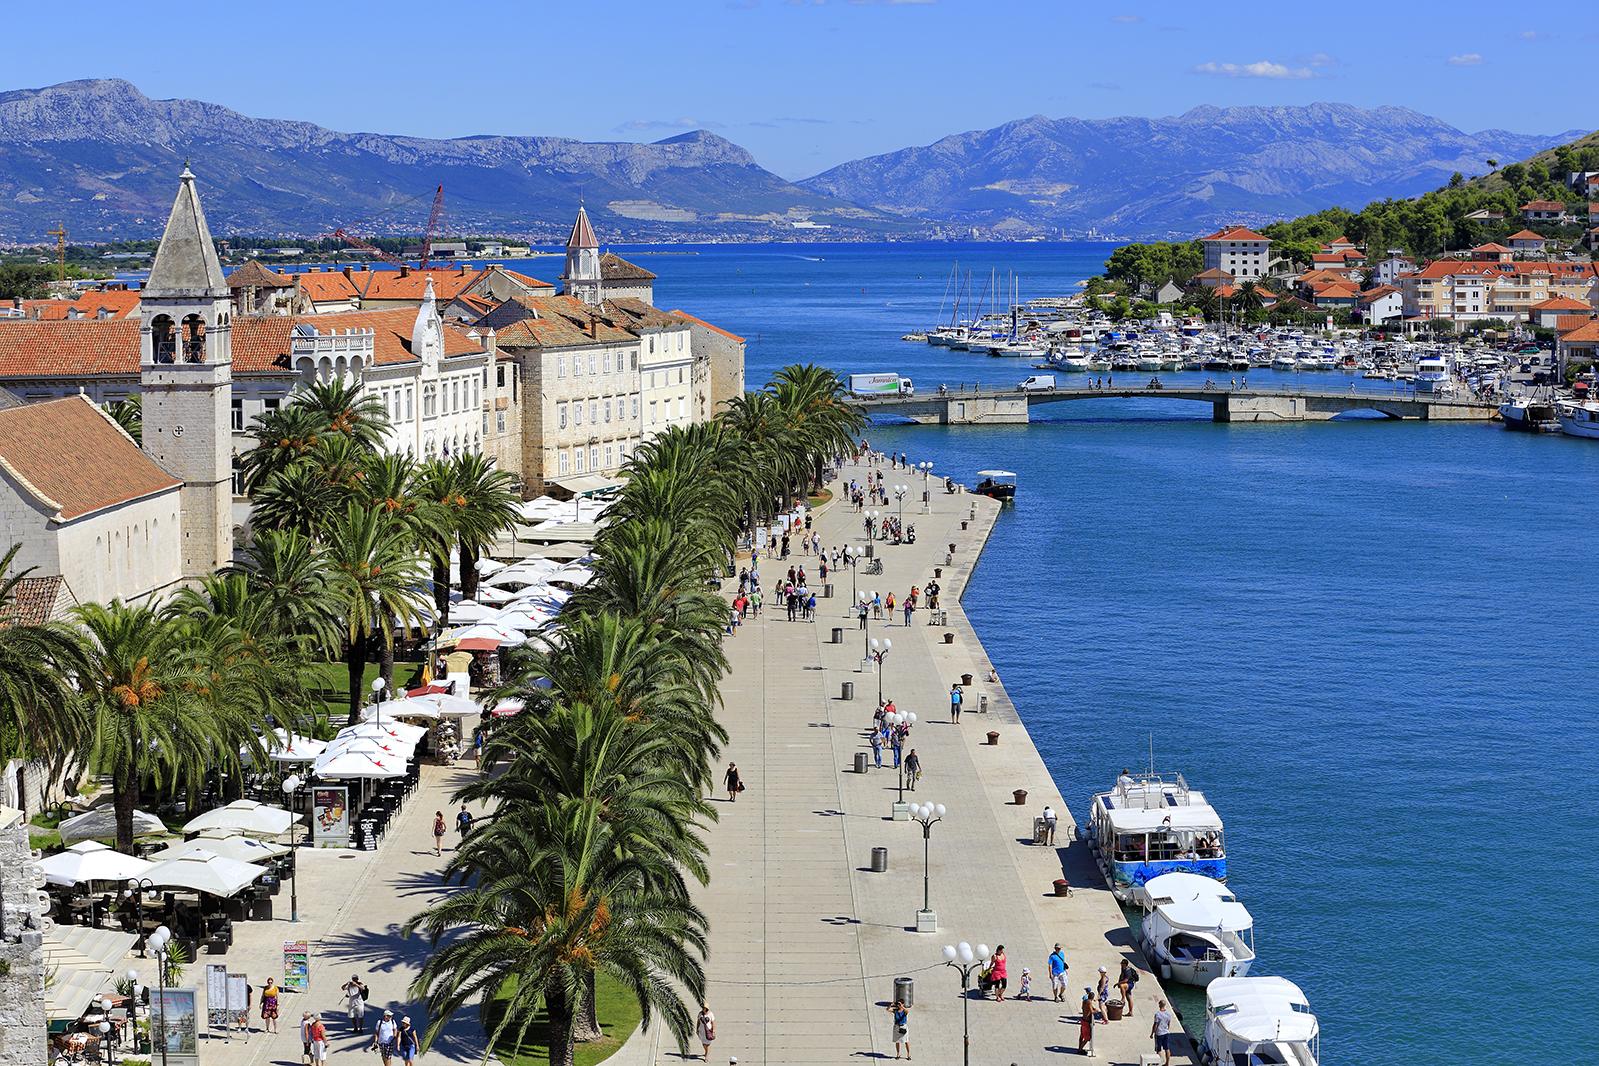 City of Trogir Croatia: small town rich with history